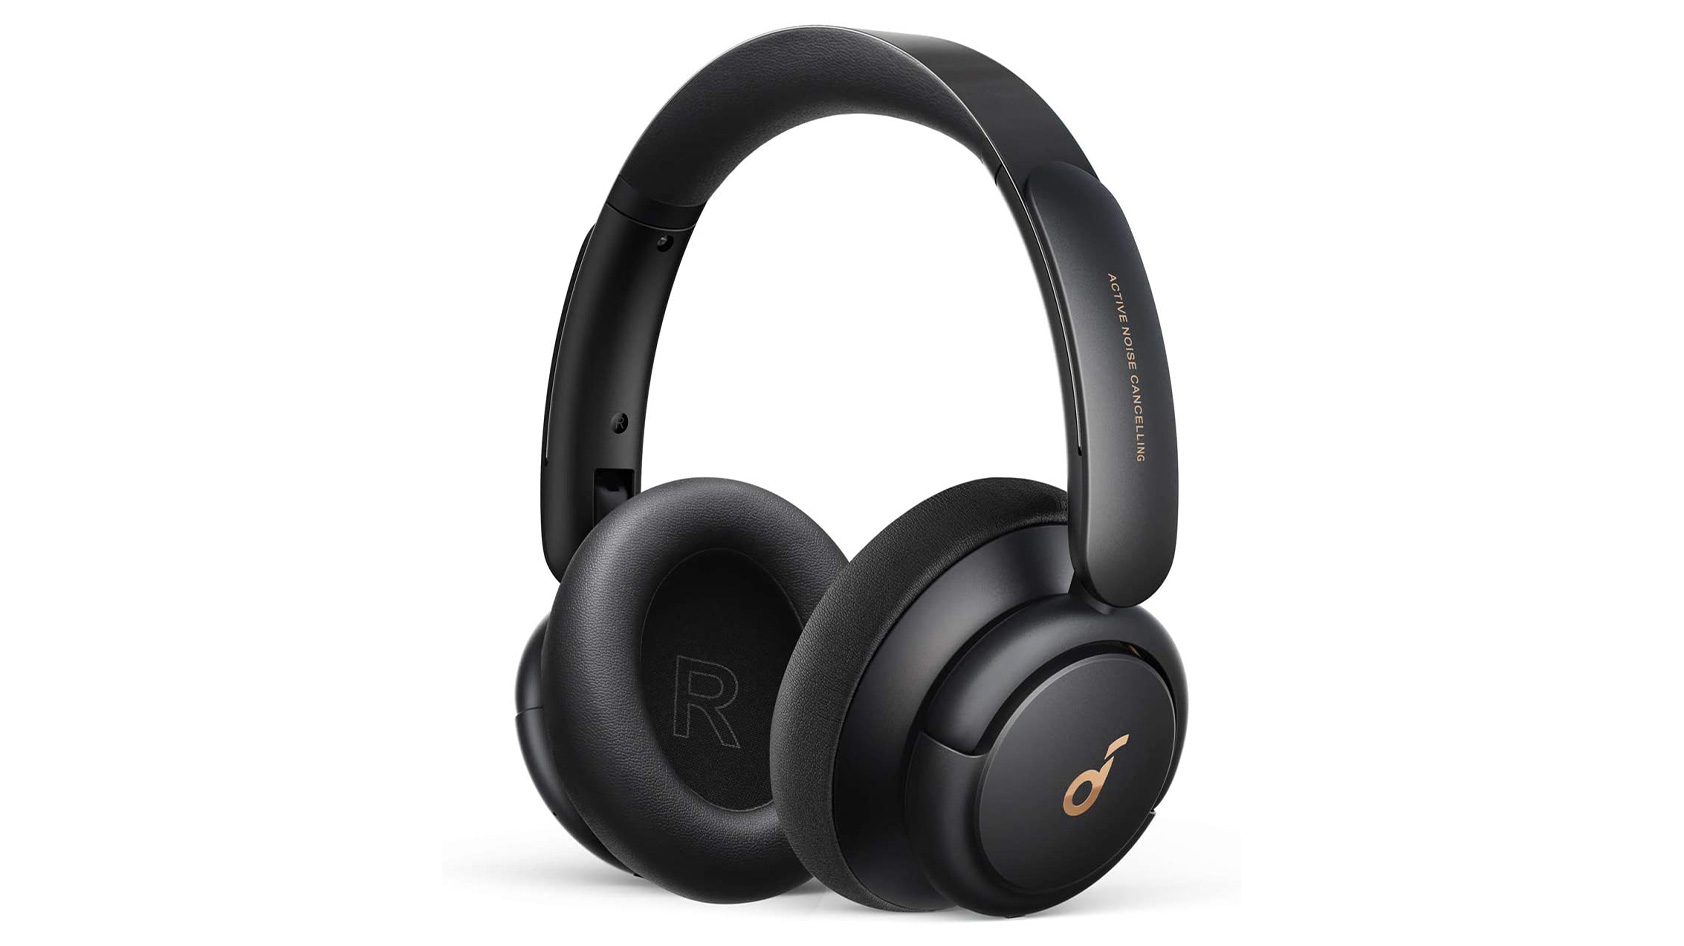 The Anker Soundcore Life Q30 noise canceling headphones in black against a white background.